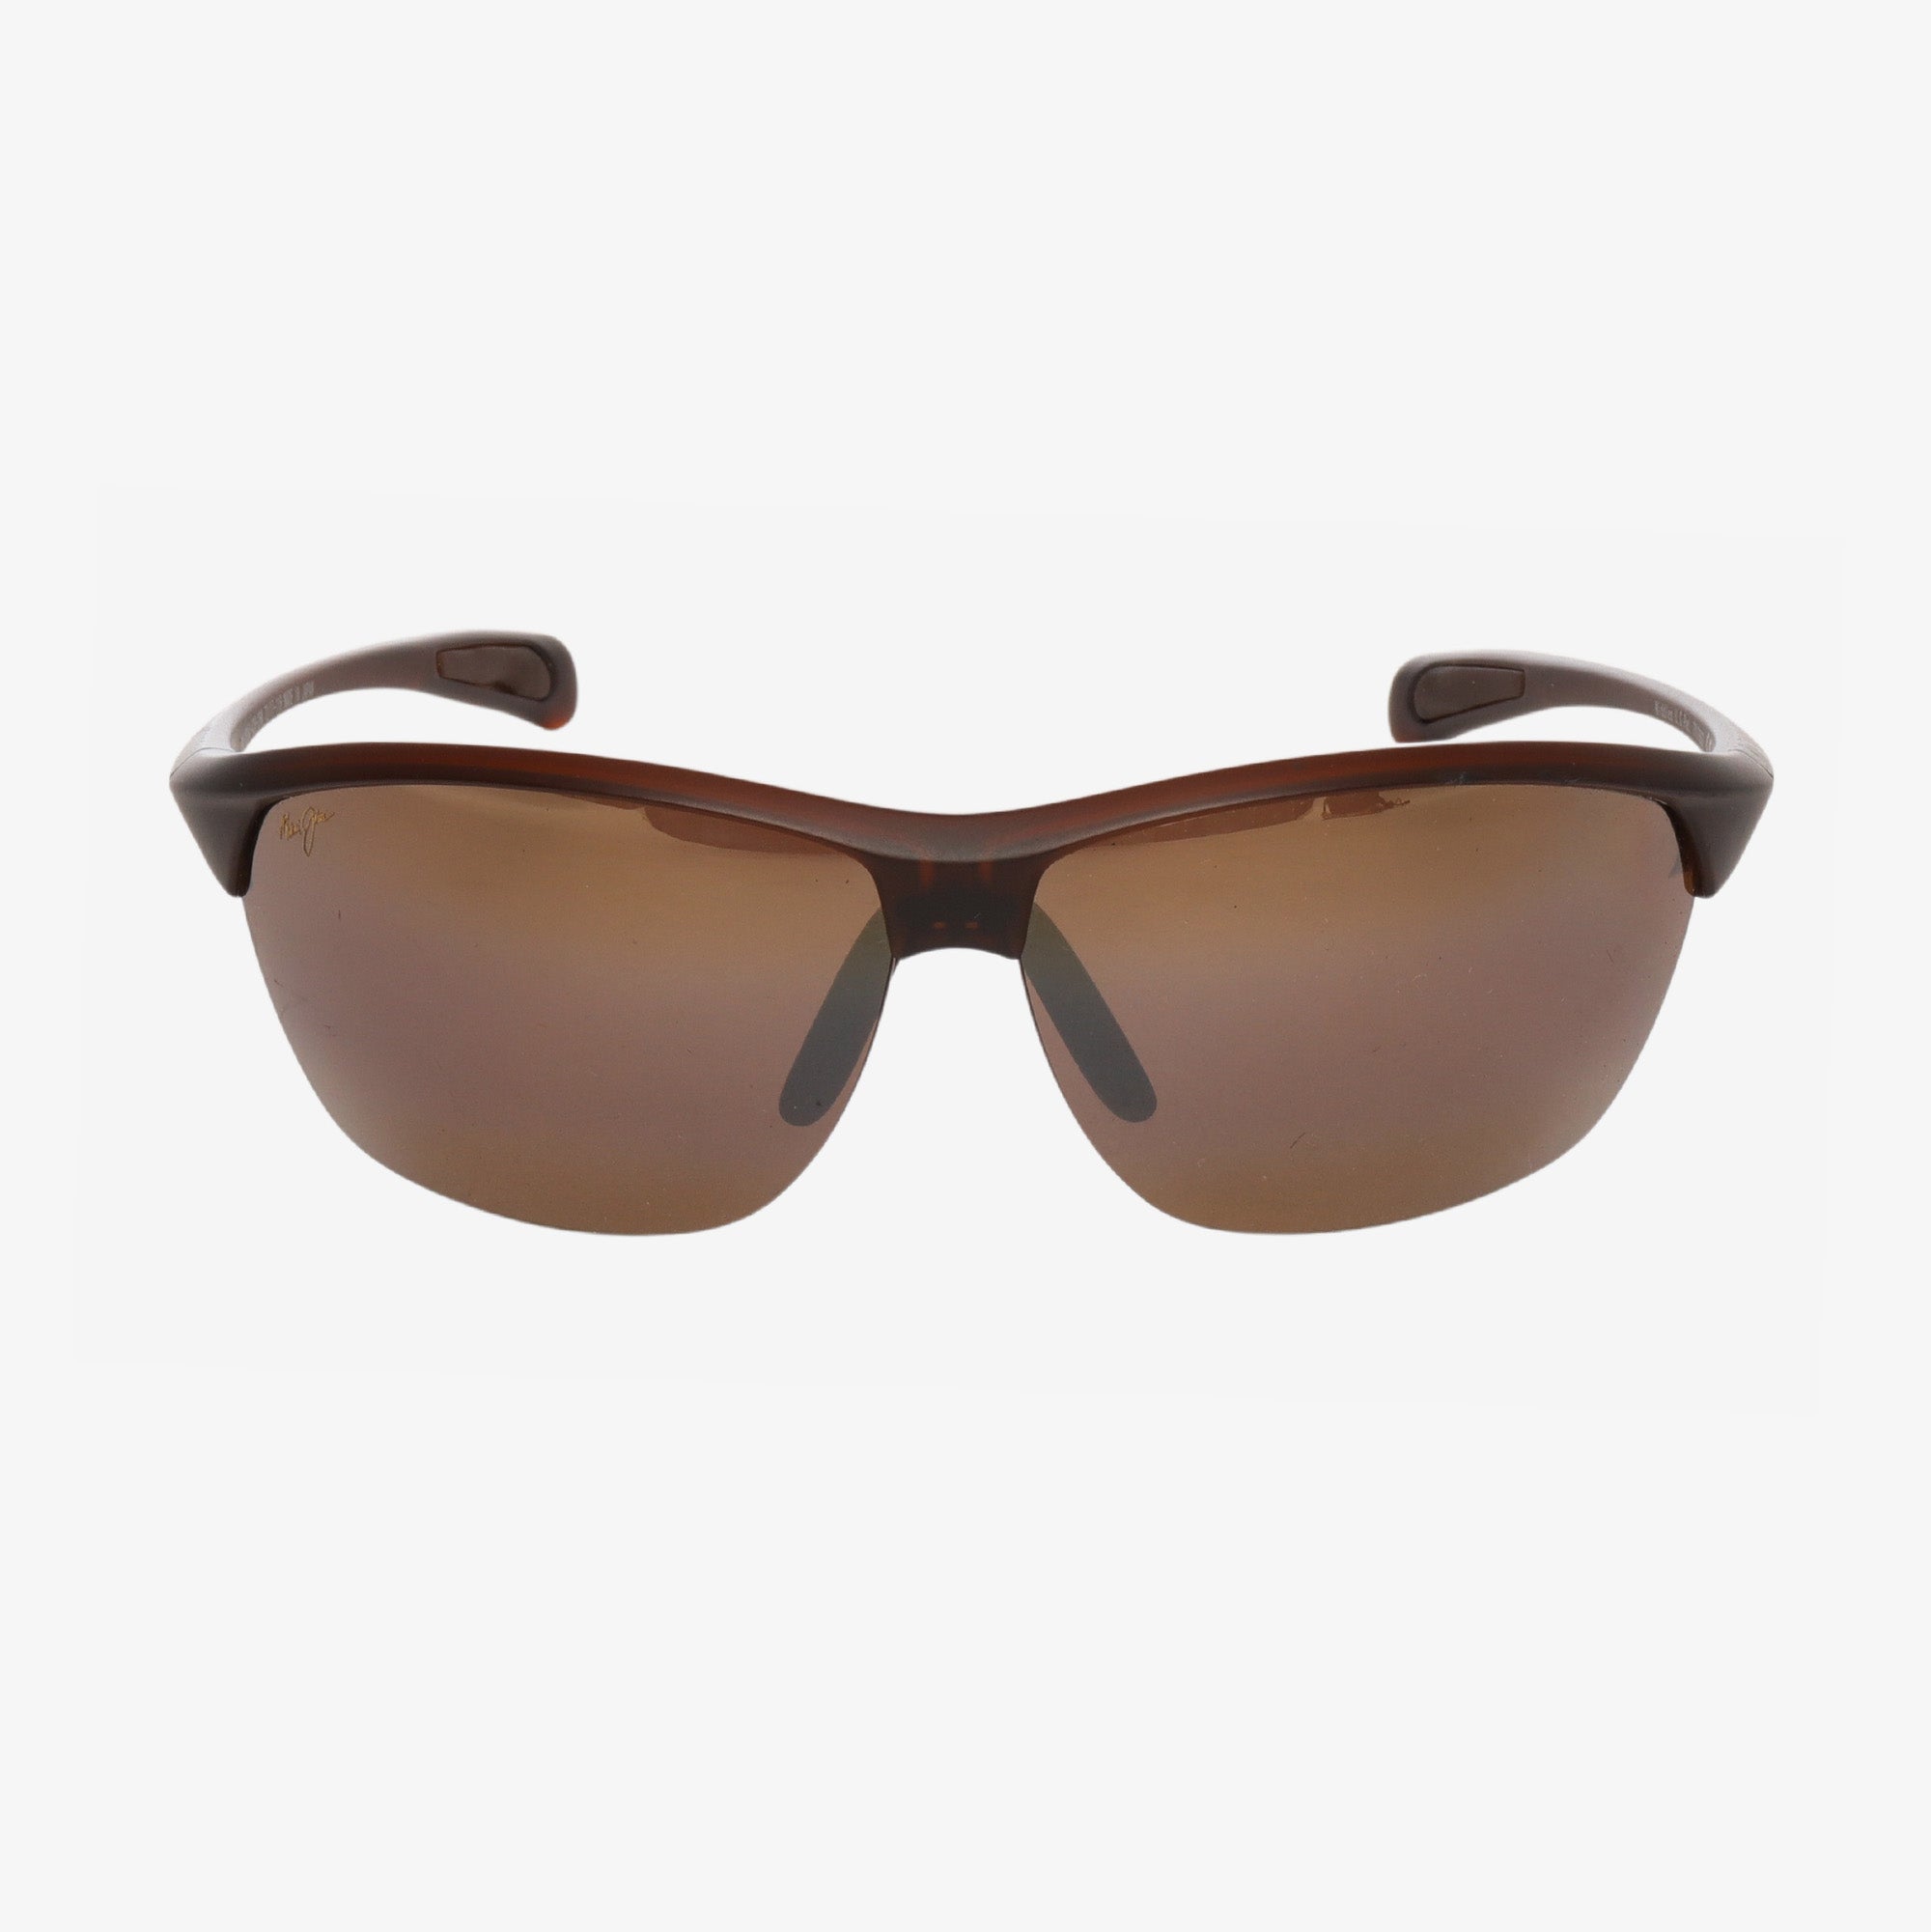 Middles Sunglasses